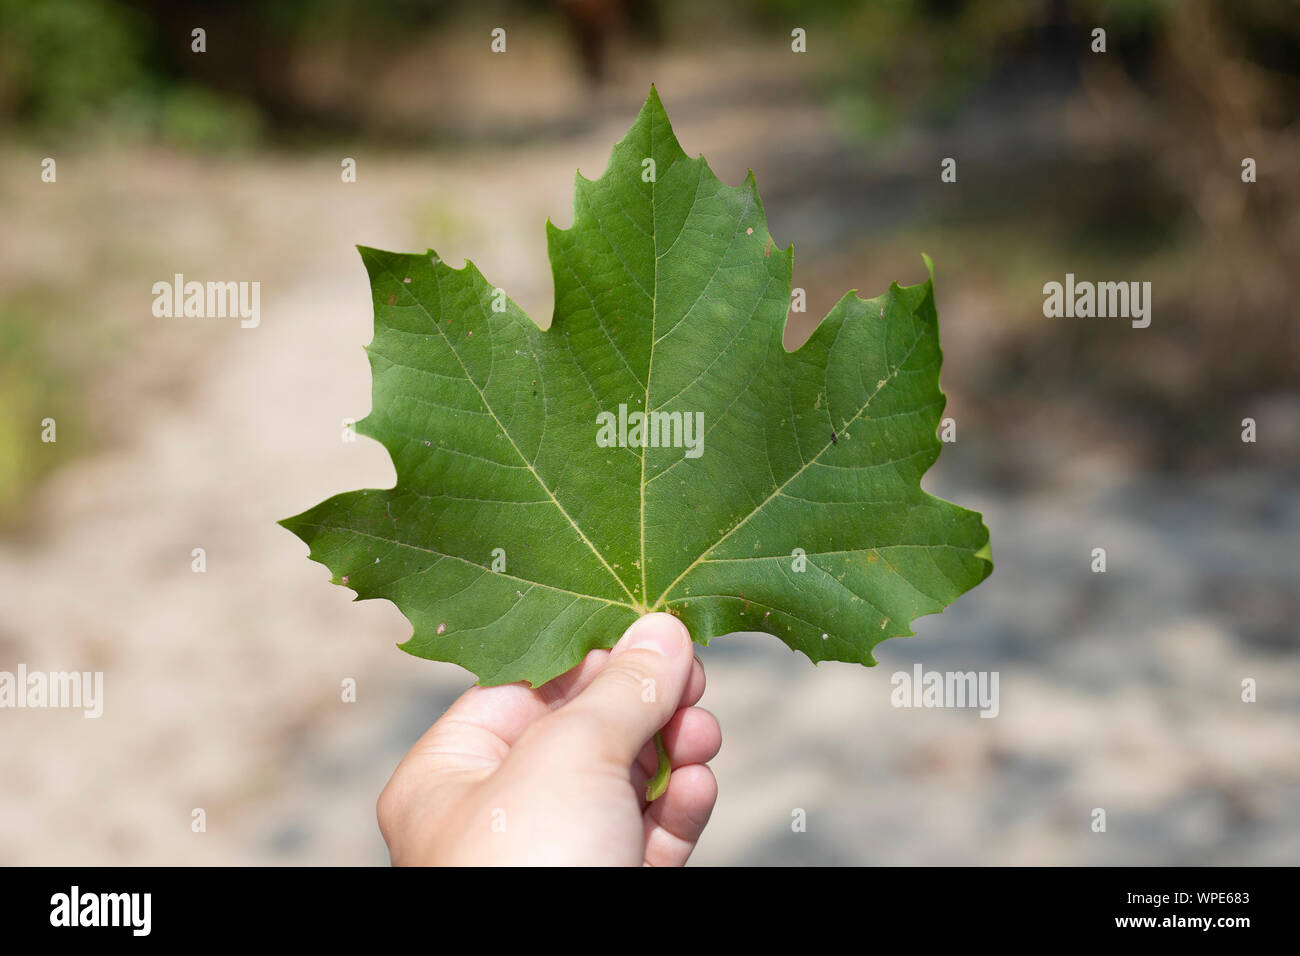 Hand Holding A Leaf Of Norway Maple Acer Platanoides In Outdoor Background Stock Photo Alamy